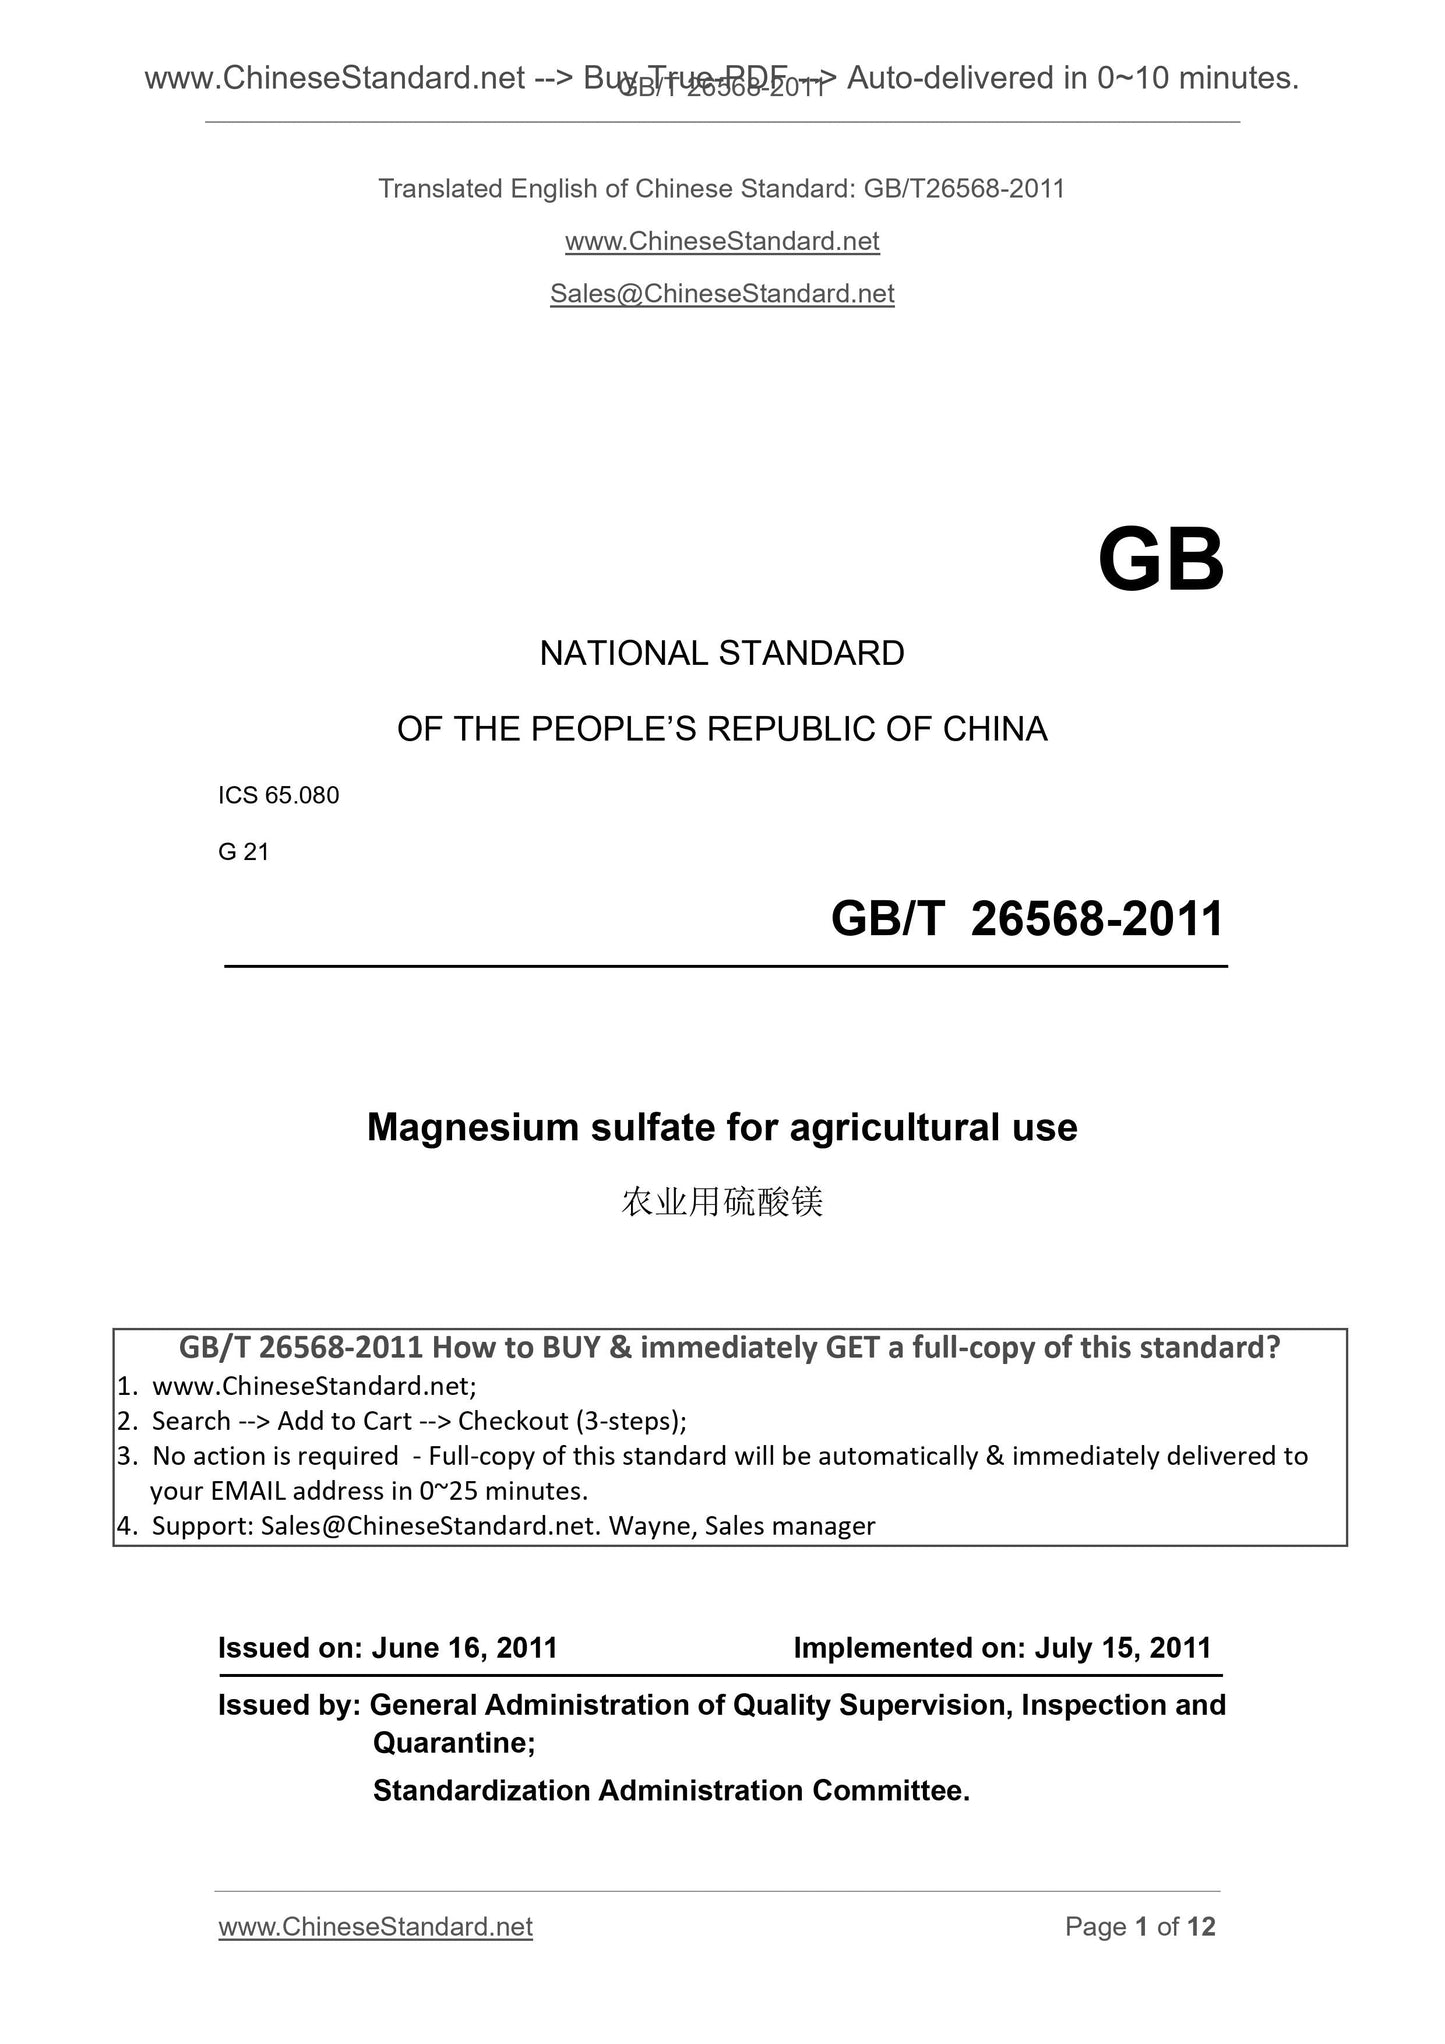 GB/T 26568-2011 Page 1